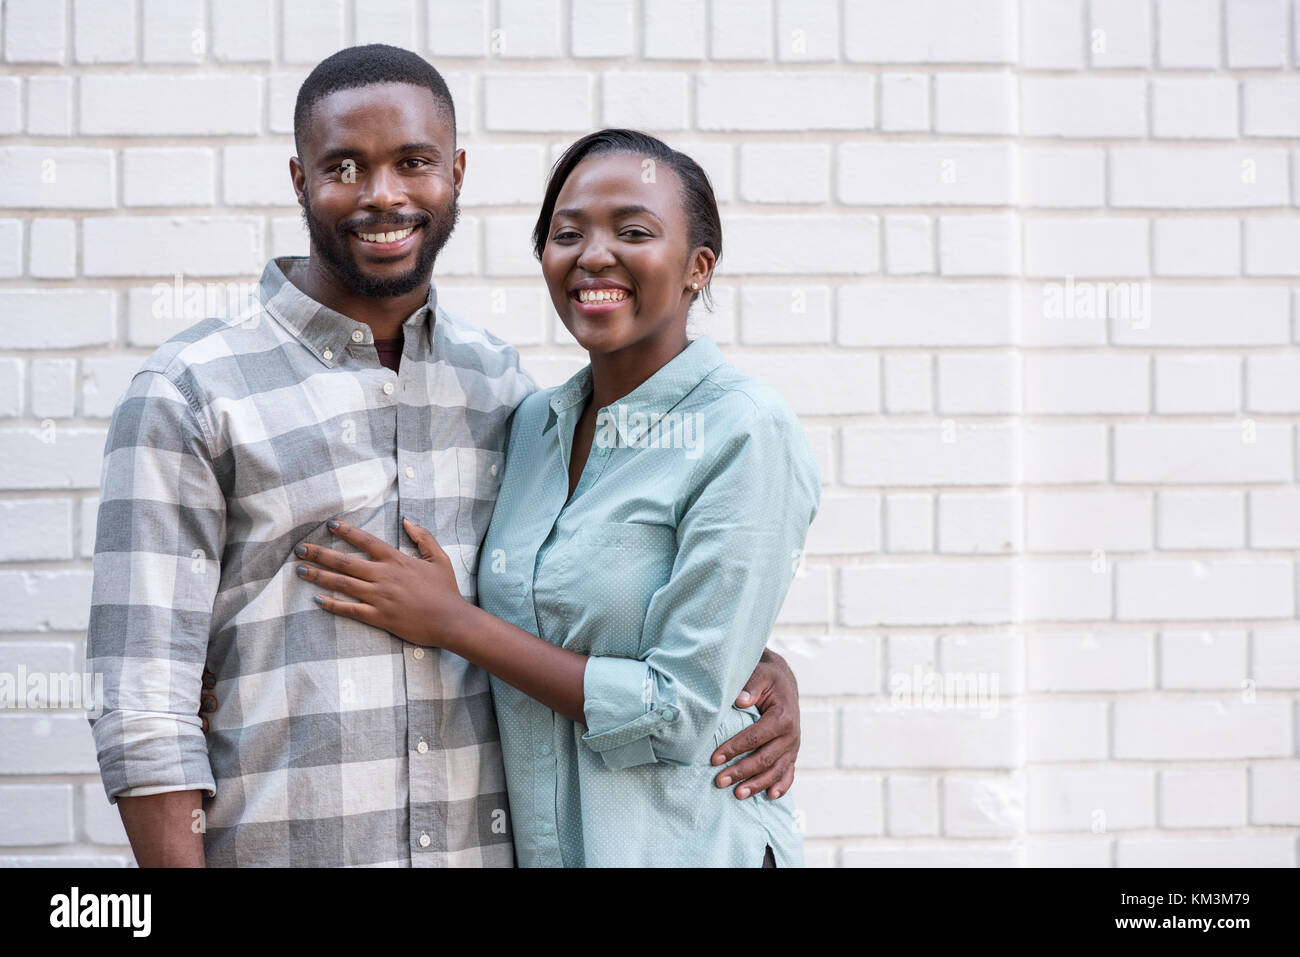 Young African couple smiling while standing together in the city Stock Photo